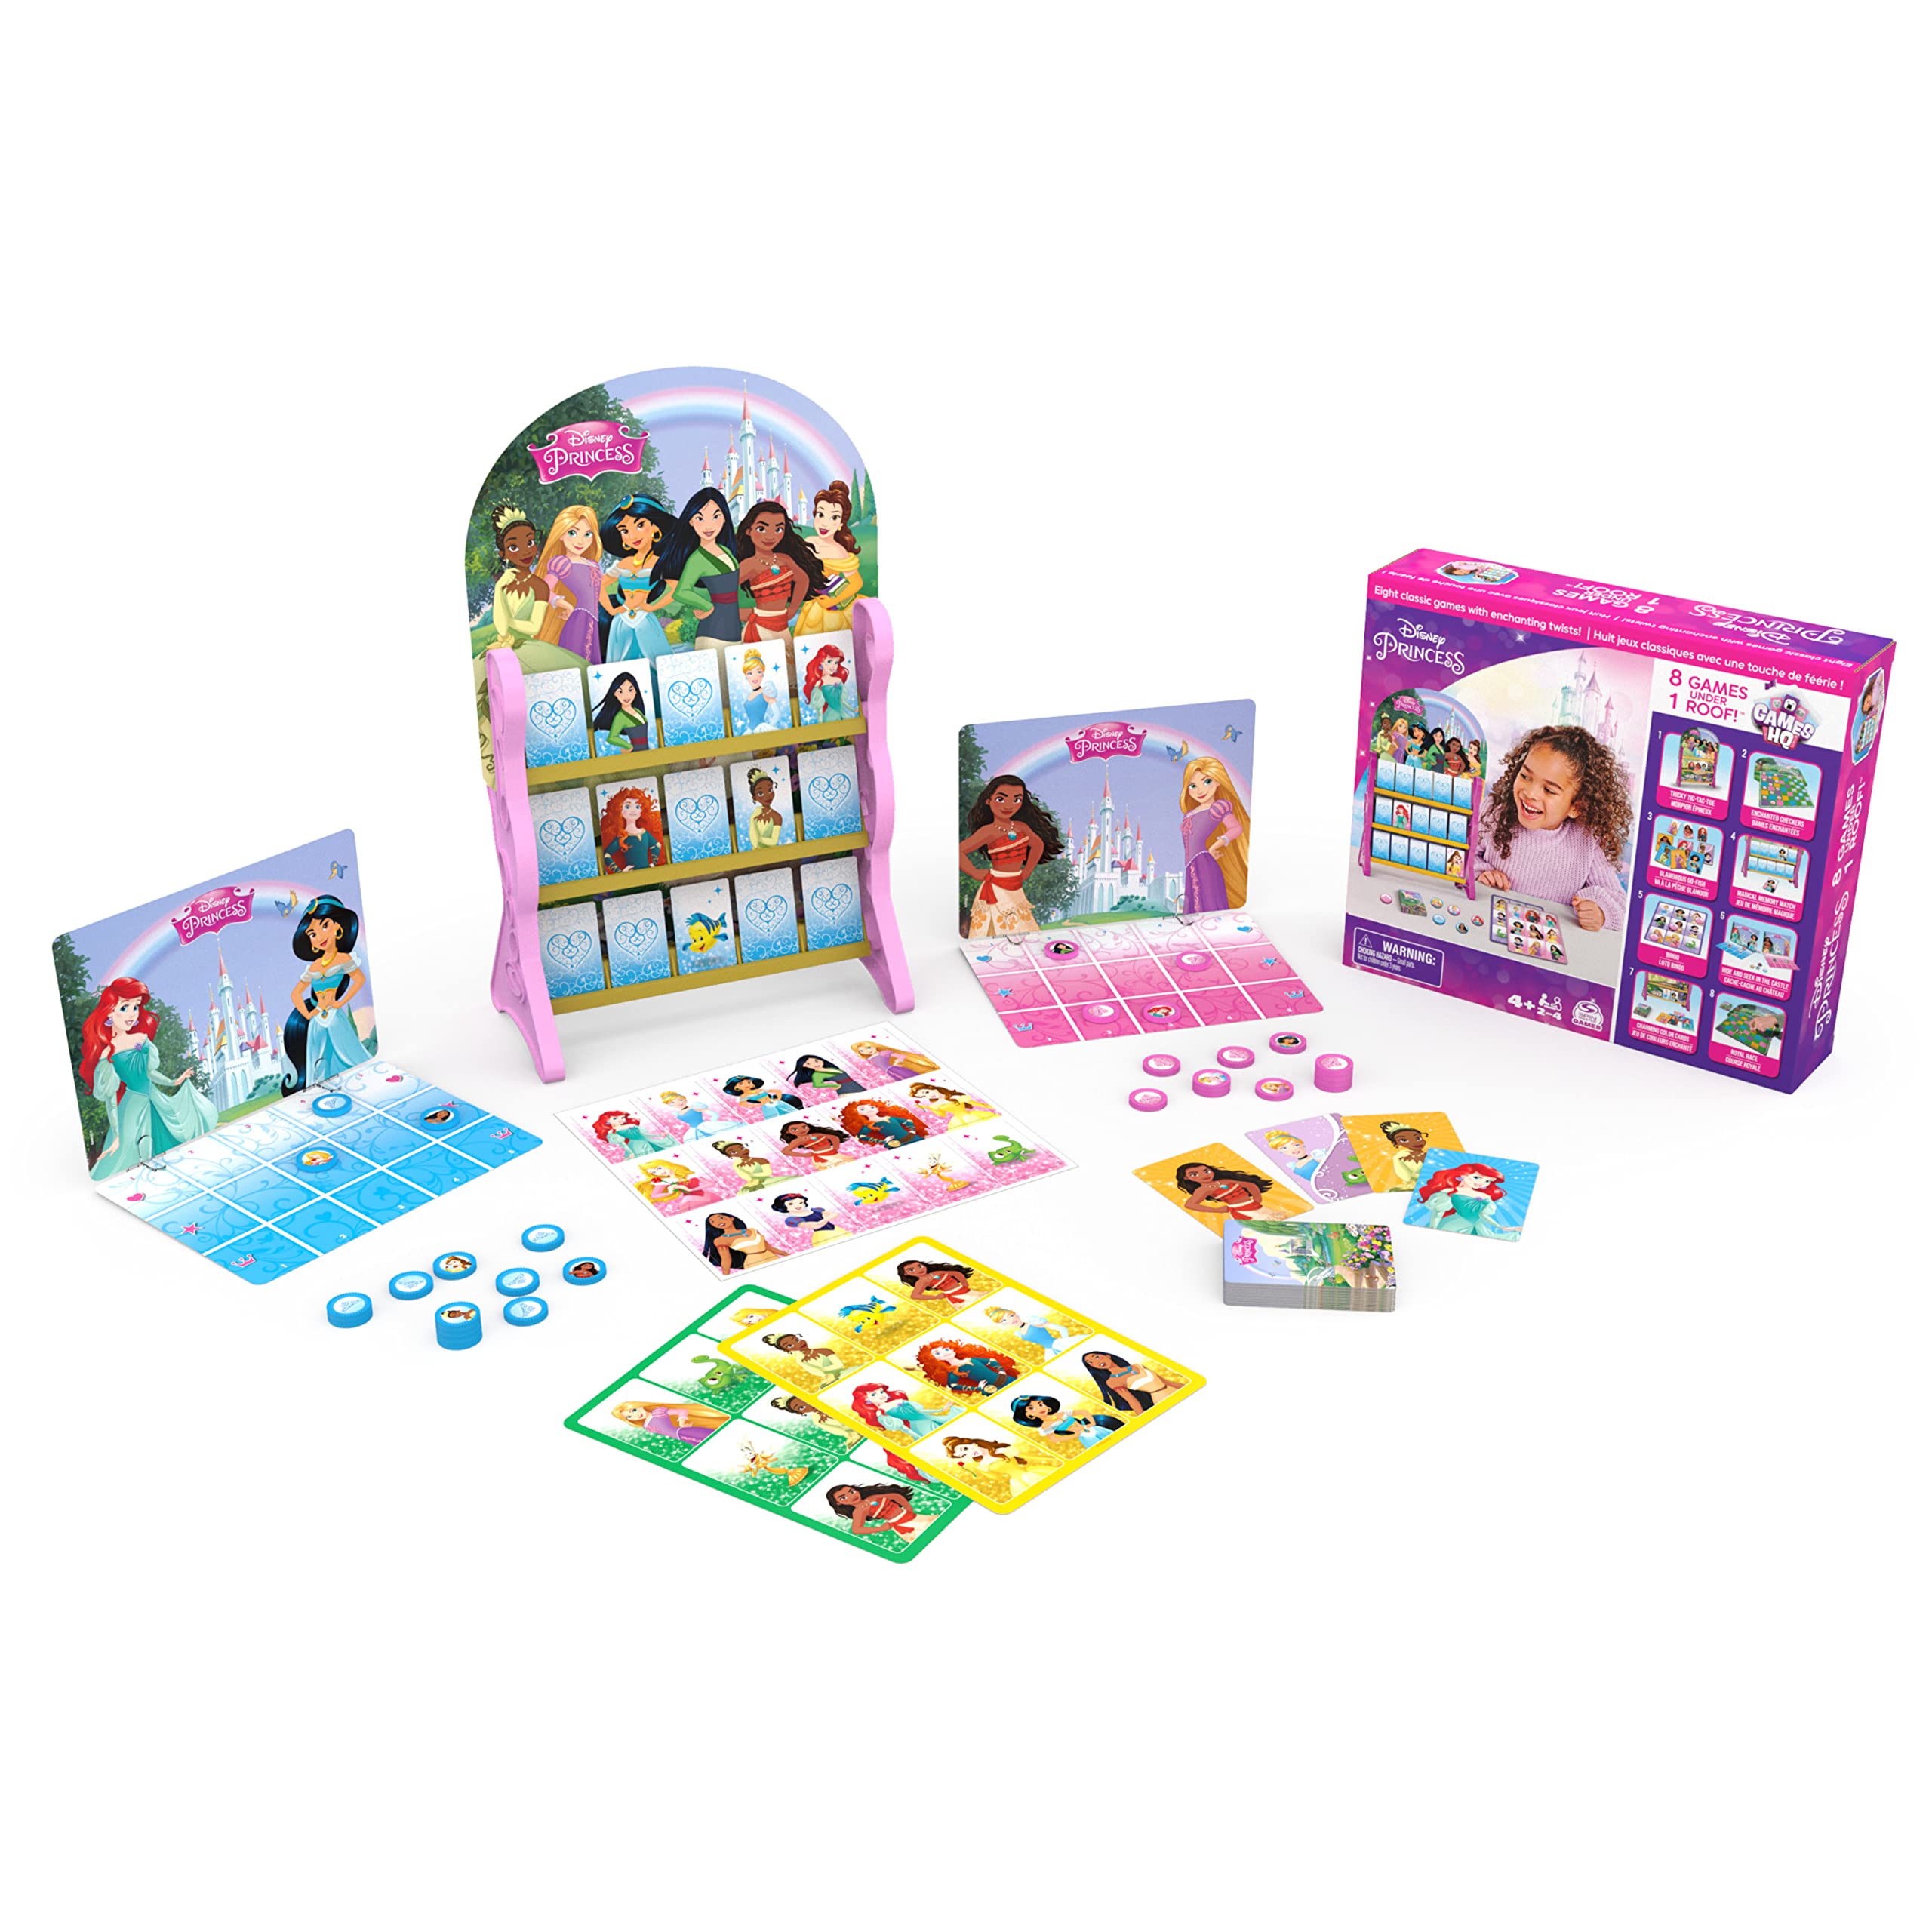 Disney Princess, Games HQ Board Games for Kids Checkers Tic Tac Toe Bingo Go Fish Card Games Disney Princess Toys, for Preschoolers Ages 4 and up